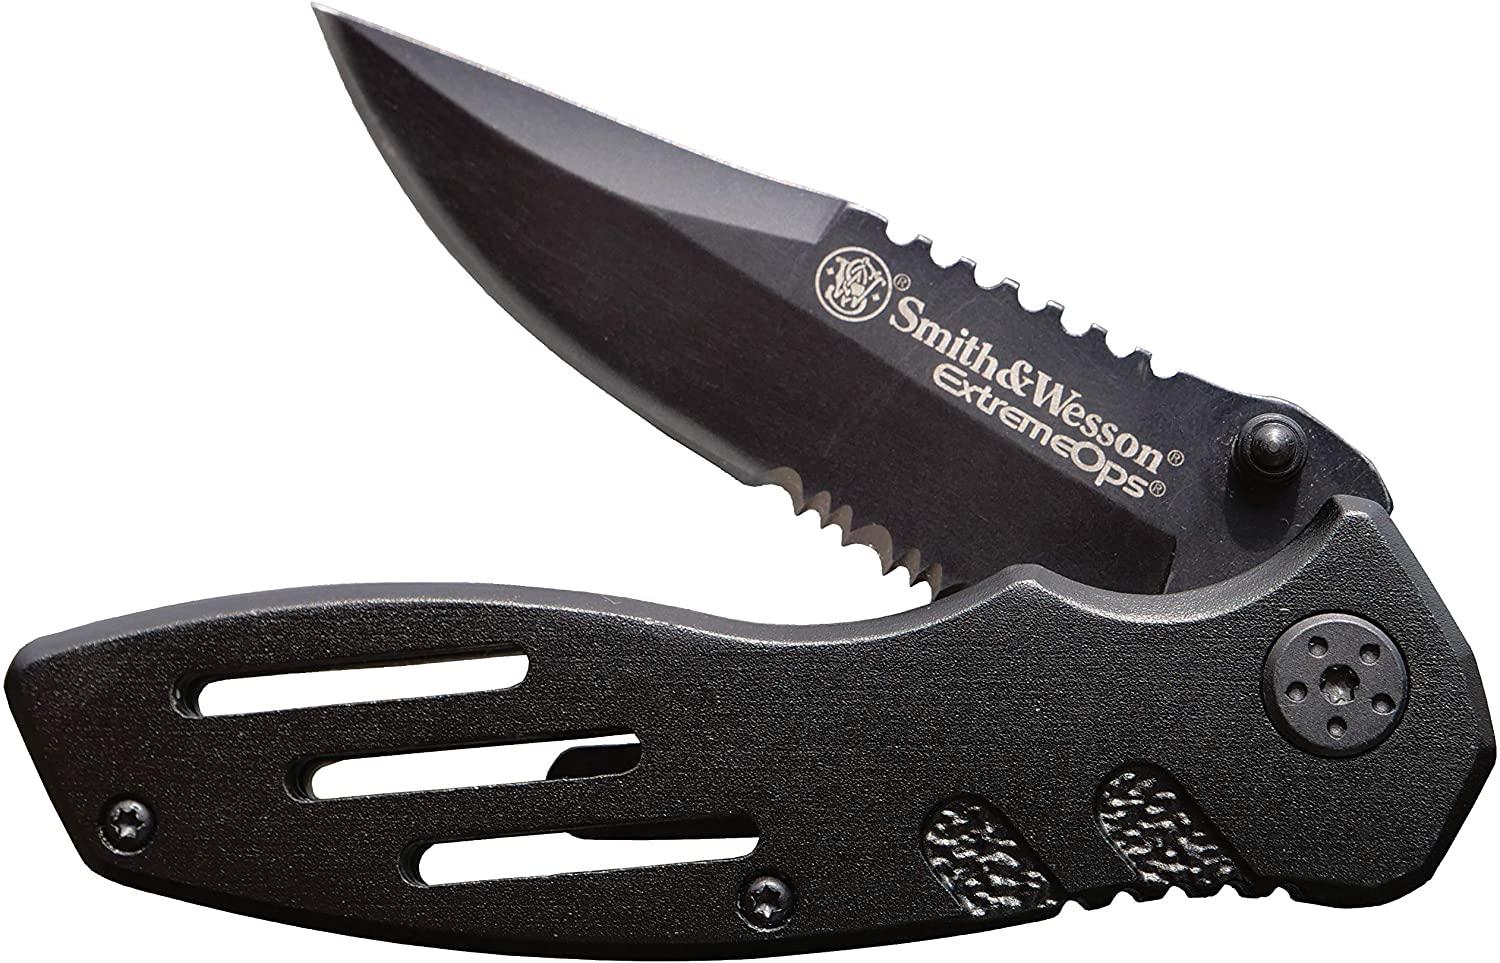 Smith and Wesson Extreme Ops SWA24S Folding Knife for $12.14